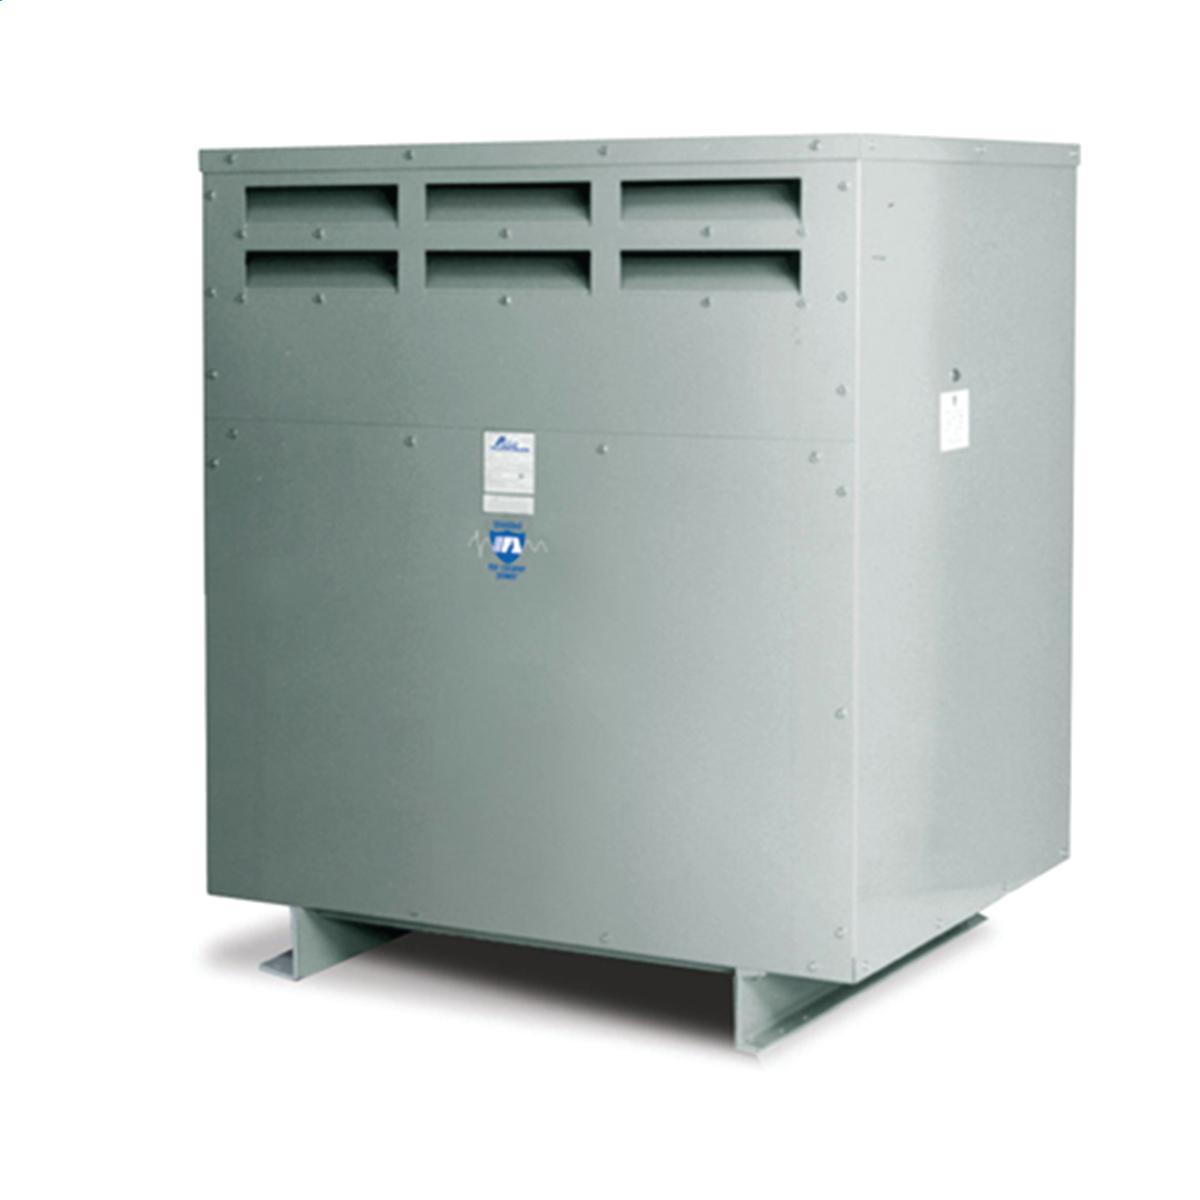 Hubbell WI001M18 Medium Voltage Transformer - Three Phase, 4160Δ - 480ΔV, 1000kVA  ; Lower operating cost over Liquid-filled ; No additional fireproofing or venting ; Long life expectancy ; Smaller, lighter easy to maintain